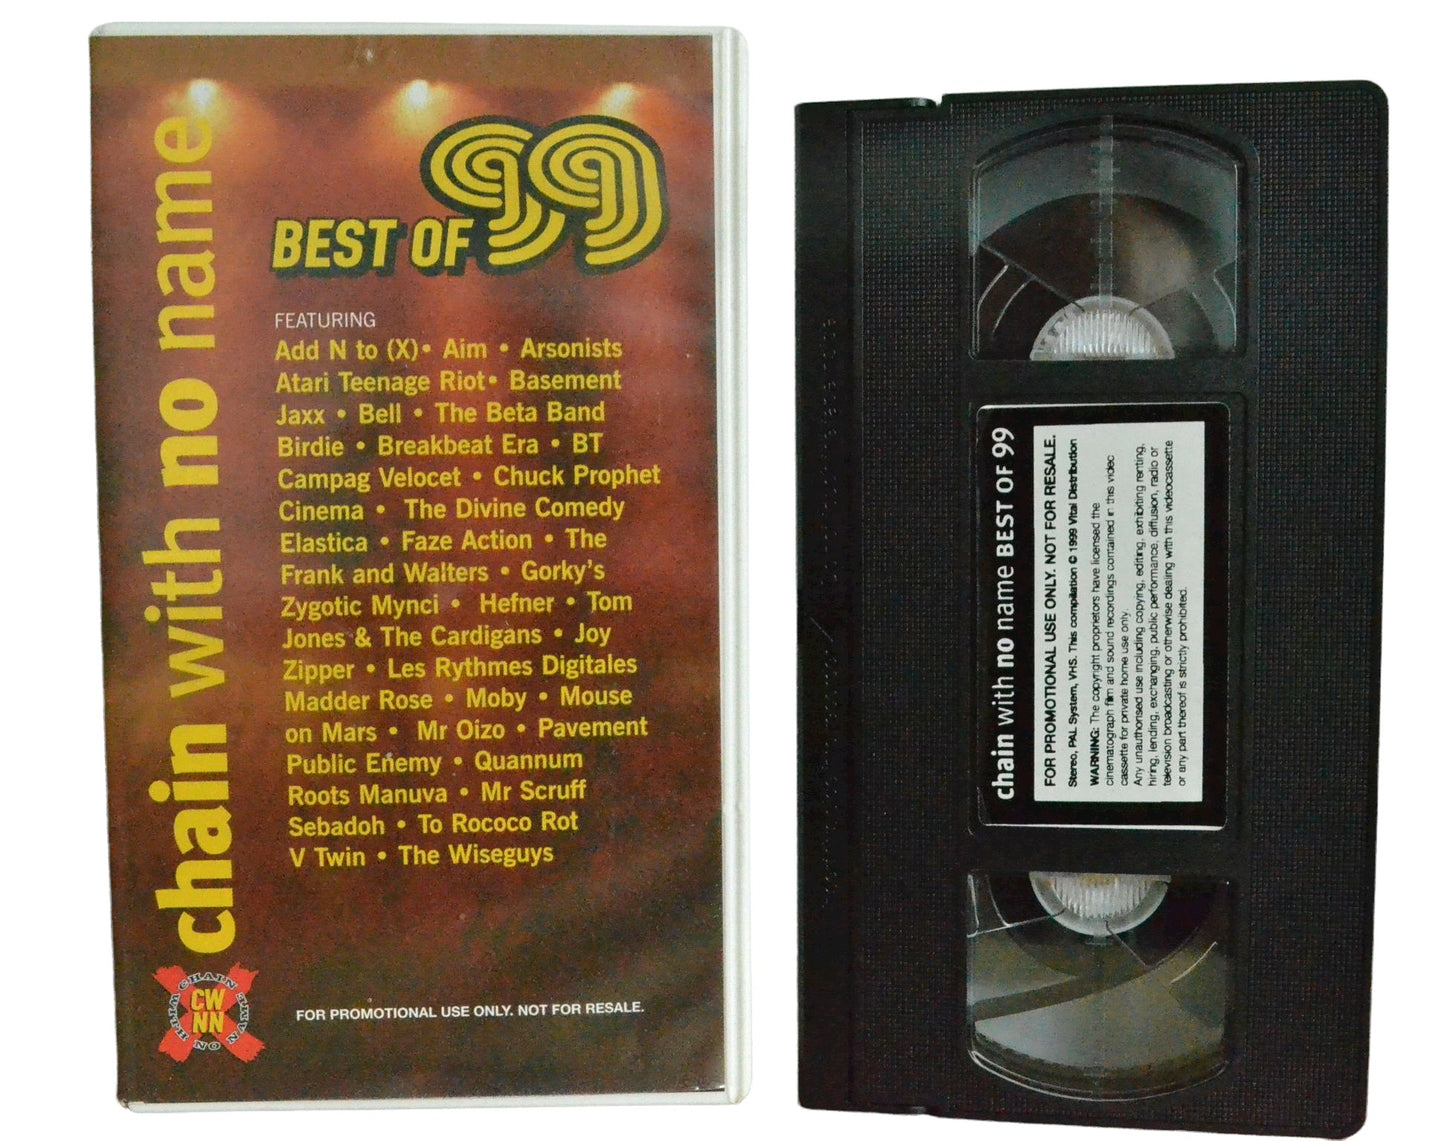 Chain With No Name - Best of 99 - Public Art - Music - Pal VHS-